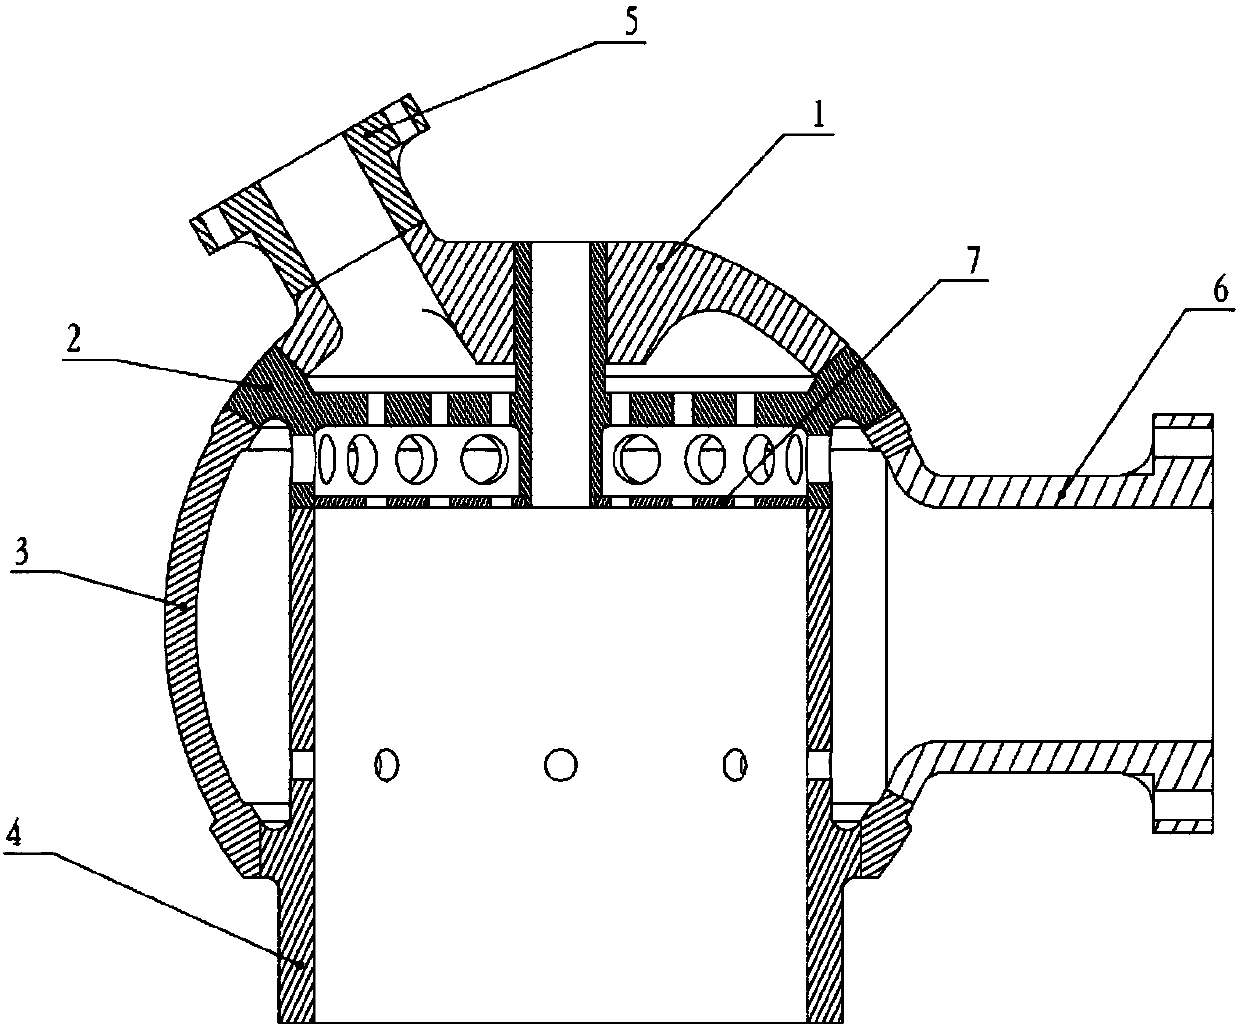 High-pressure-bearing pre-combustion chamber head shell structure